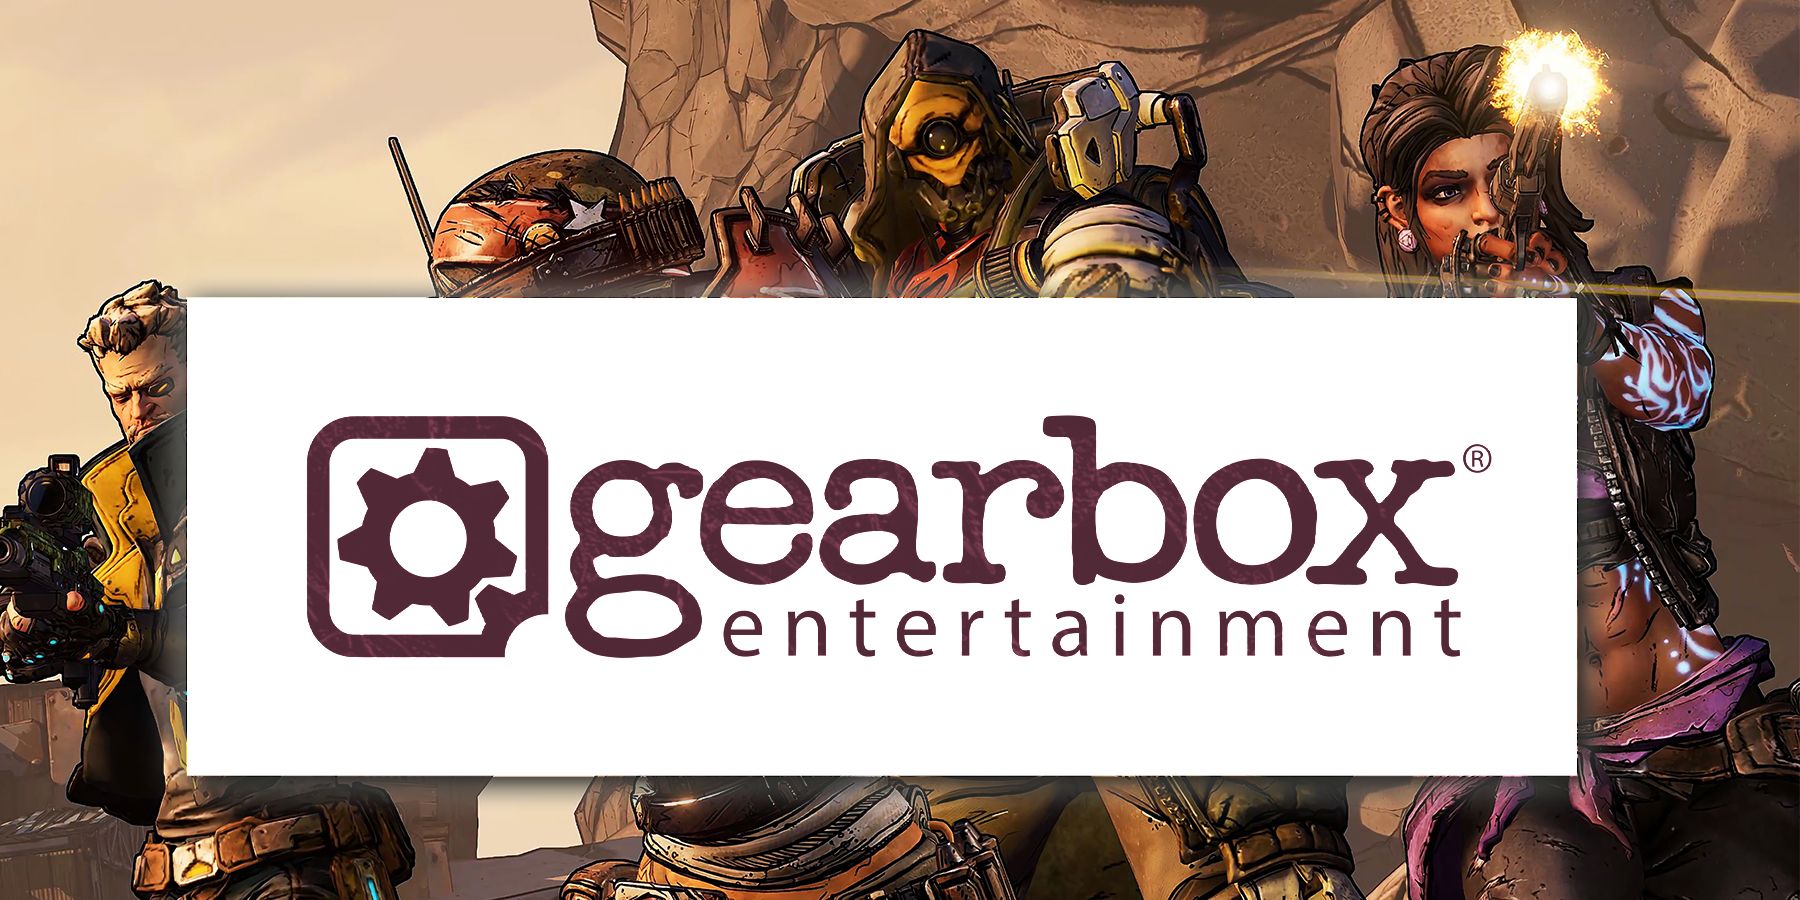 microsoft, gearbox hit with layoffs hours after embracer sale announcement